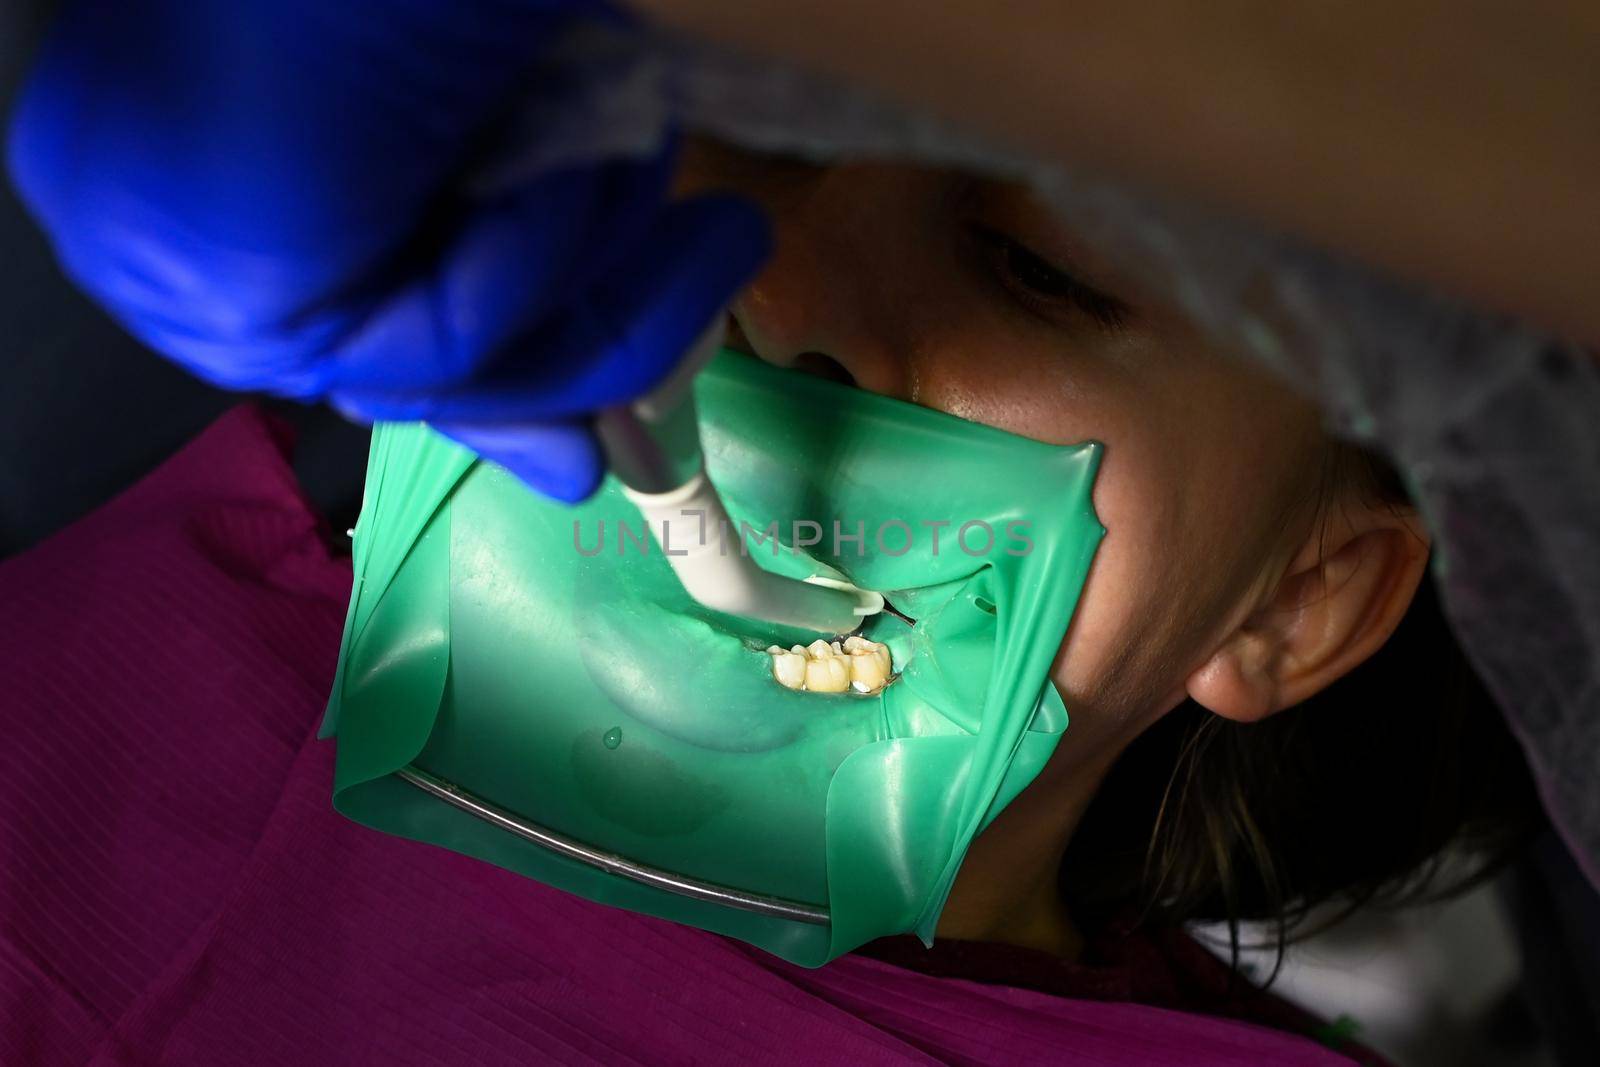 A woman at a dentist's appointment, a dentist uses a rubber dam and dental tools for treatment.2020